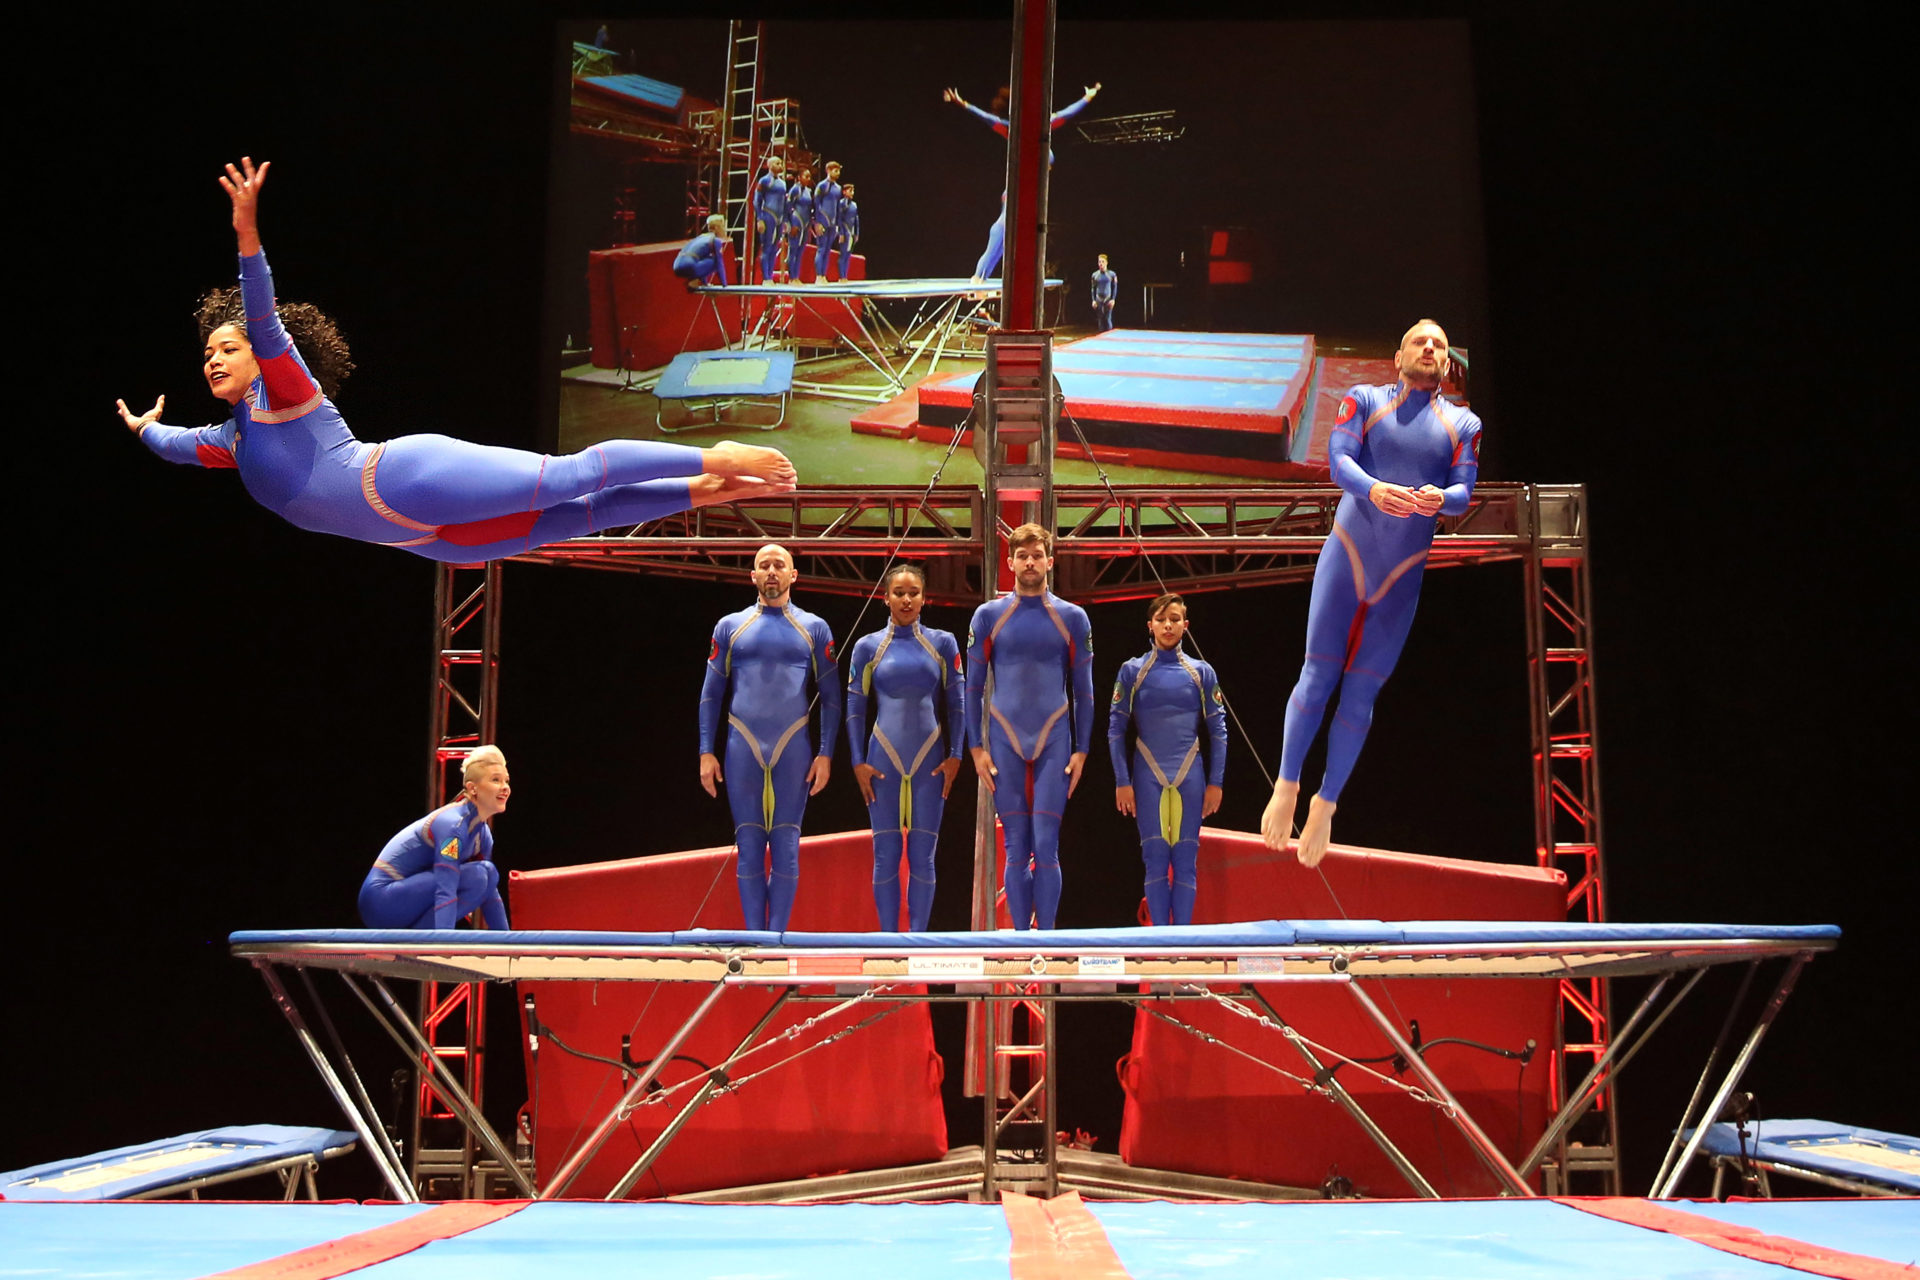 Streb Extreme Action:
Sea [Singular Extreme Actions]